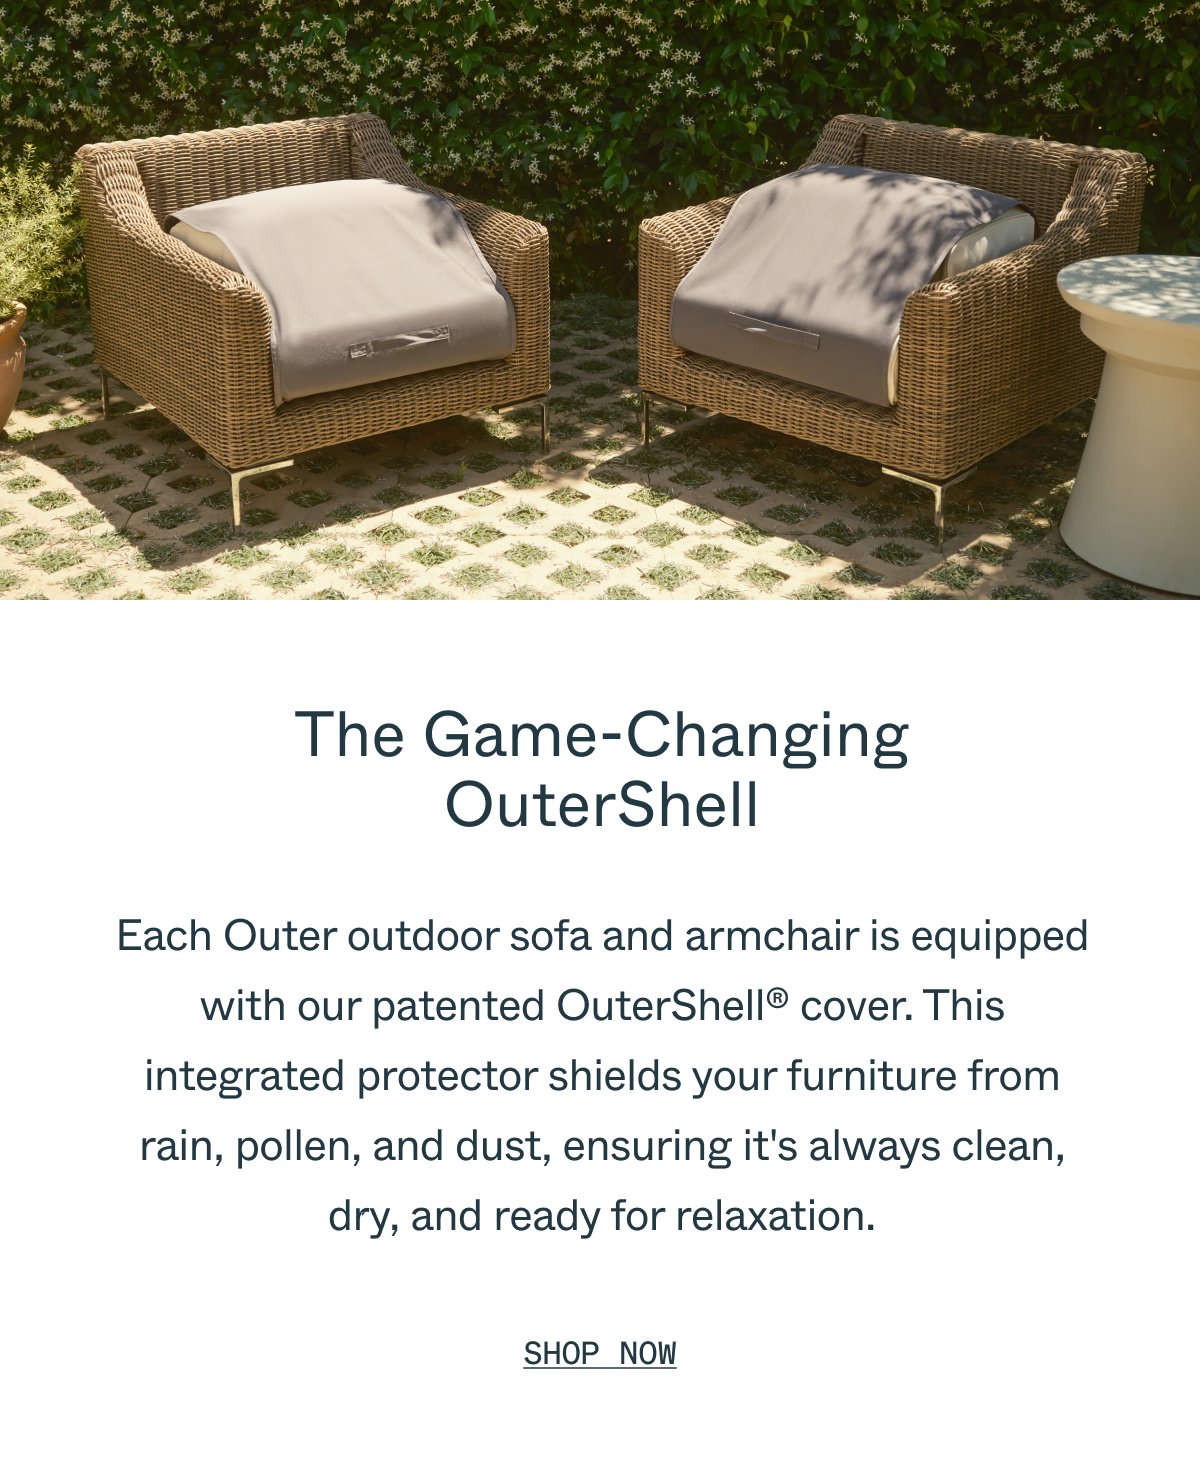 The Game-Changing OuterShell Each Outer outdoor sofa and armchair is equipped with our patented OuterShell cover. This integrated protector shields your furniture from rain, pollen, and dust, ensuring it's always clean, dry, and ready for relaxation. Shop Now.